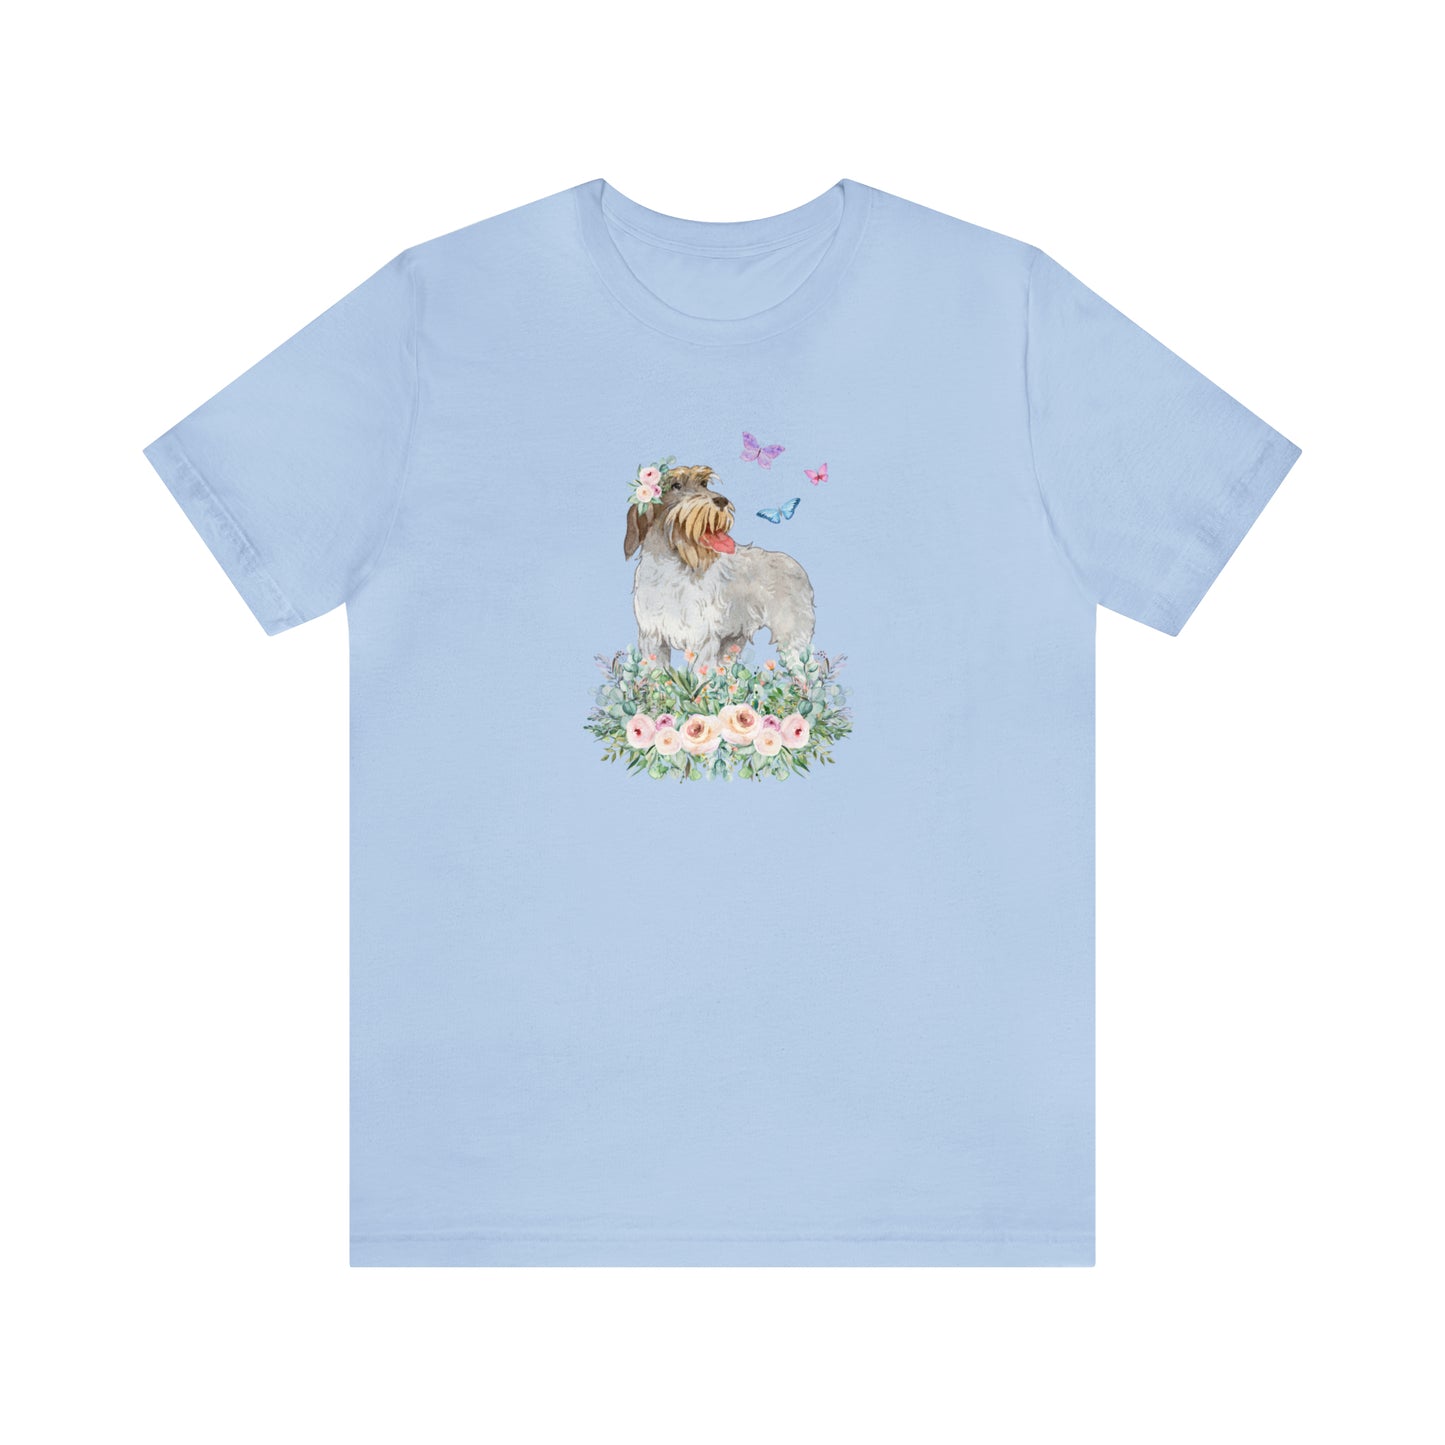 blue sky light Wirehaired Pointing Griffon in flower rose meadow with butterflies dog lover gift women men t-shirt unisex short sleeve shirt